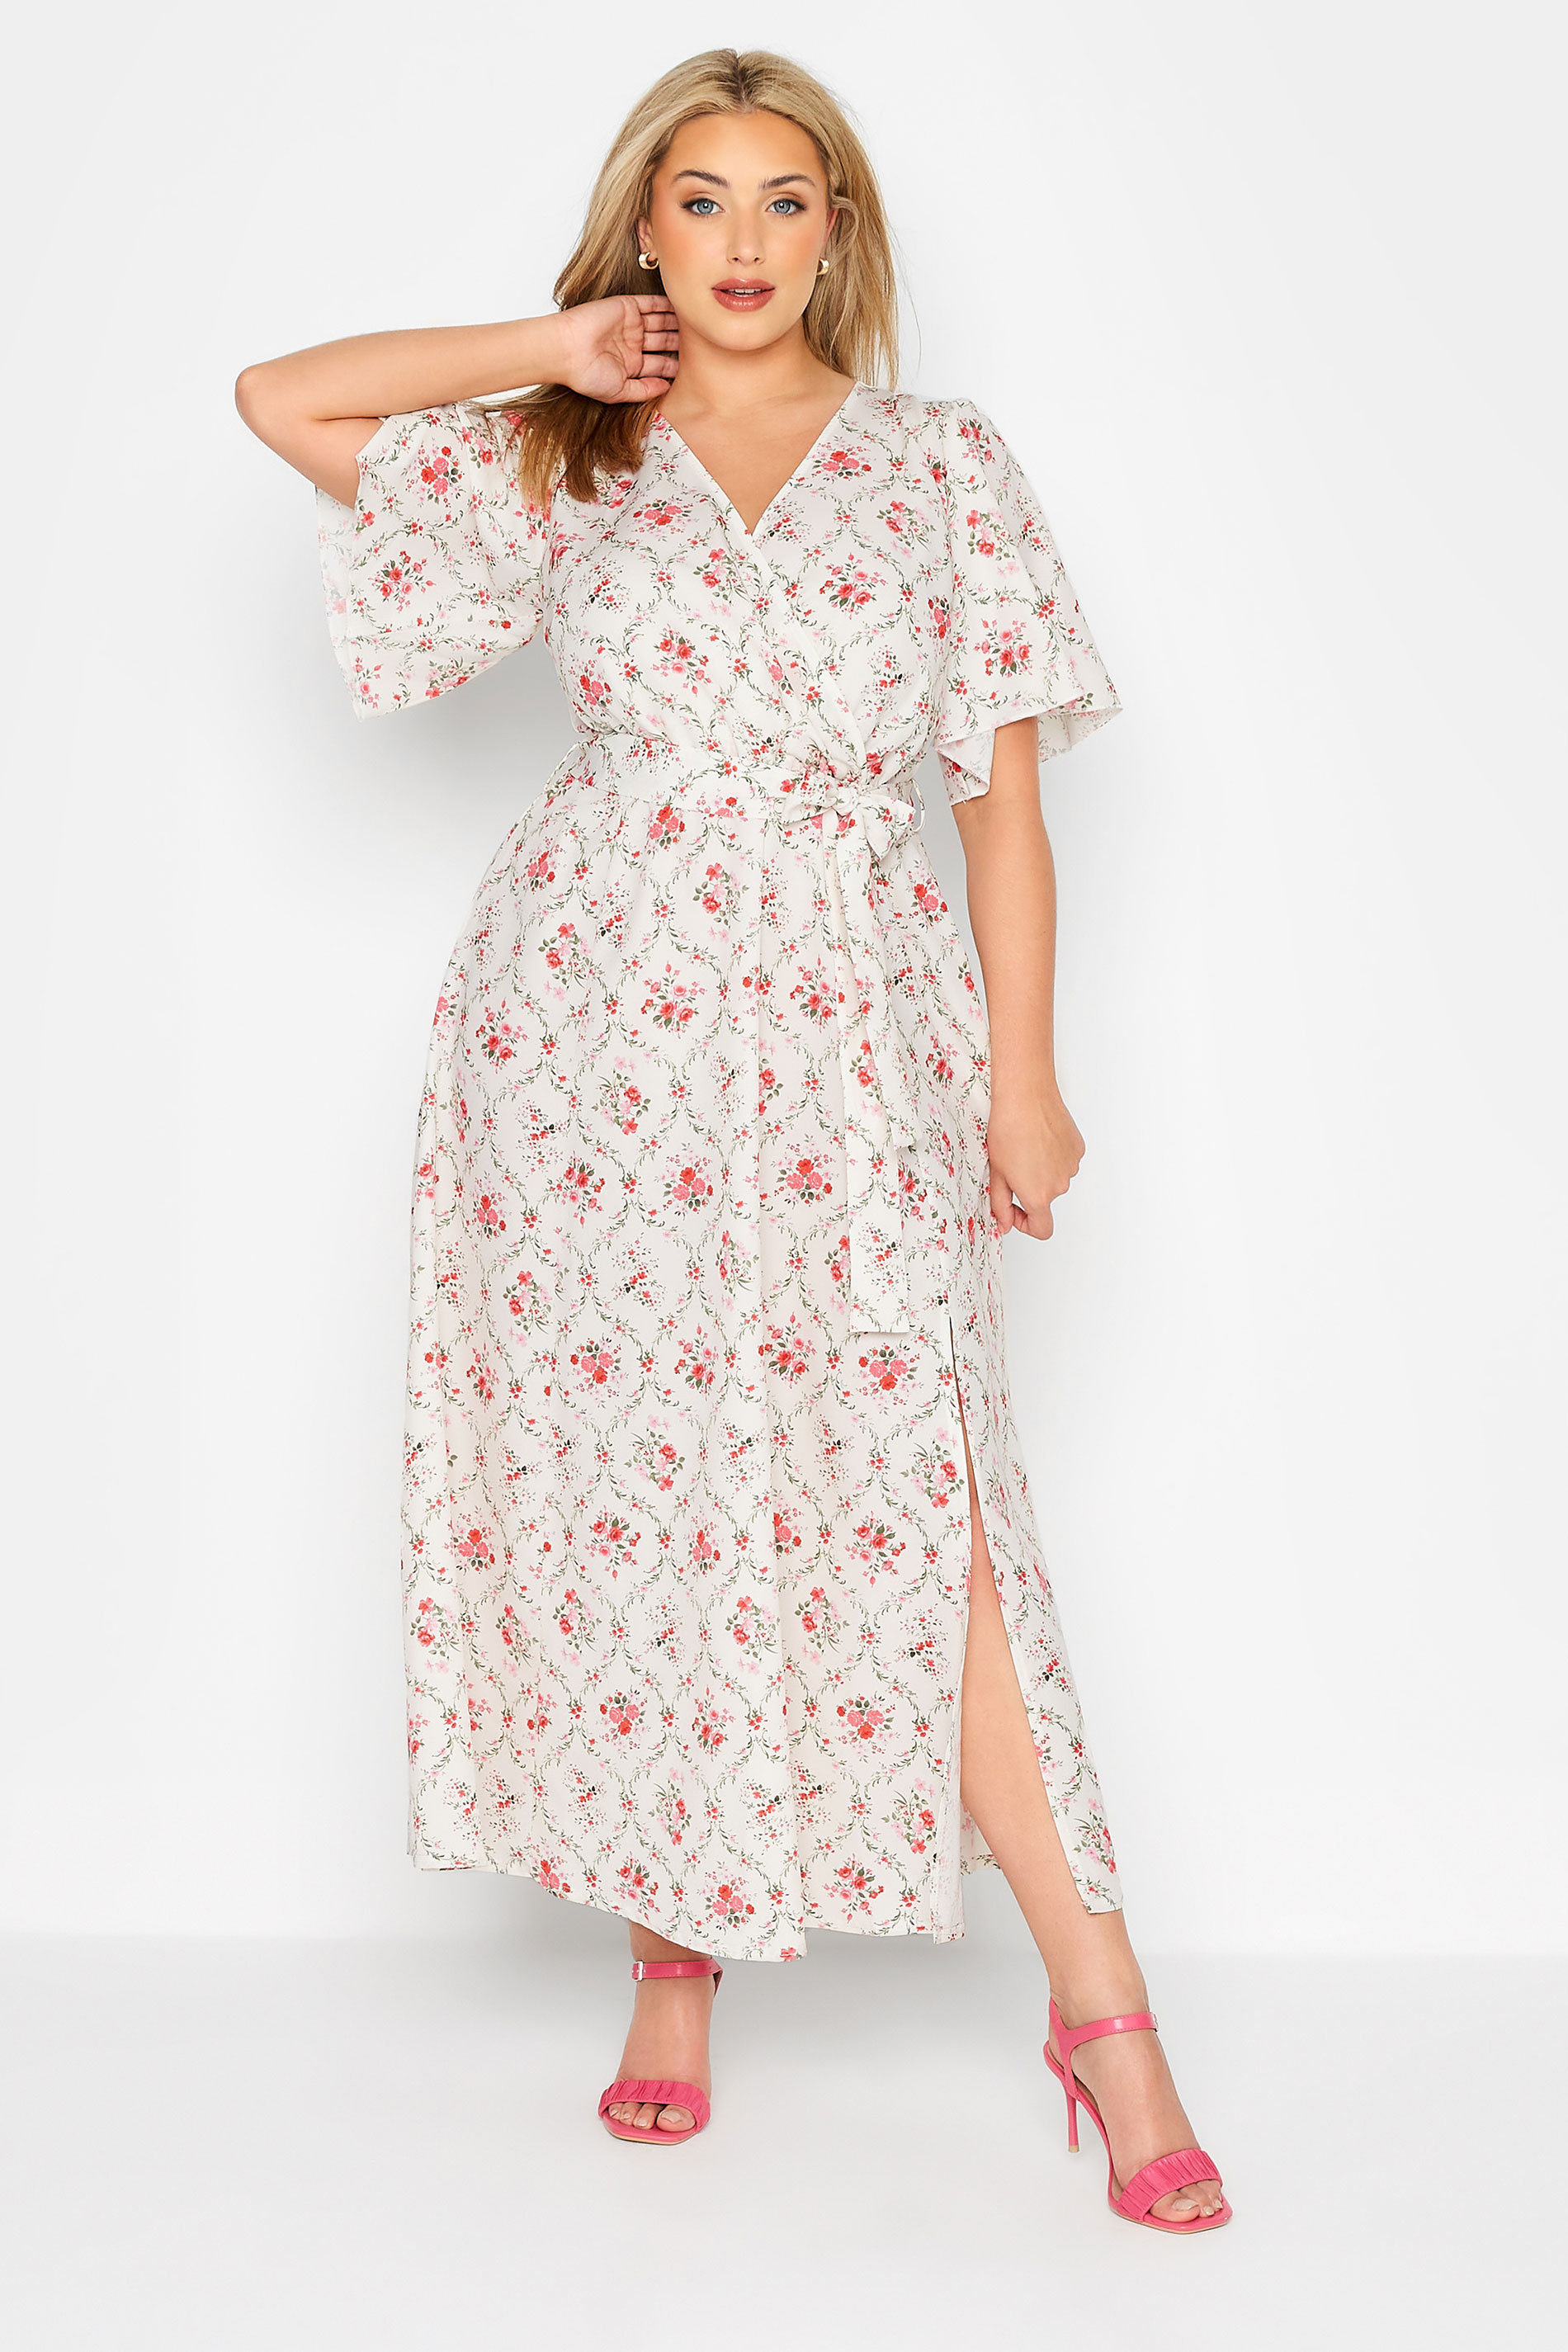 YOURS LONDON Plus Size White Floral Wrap Dress | Yours Clothing 1